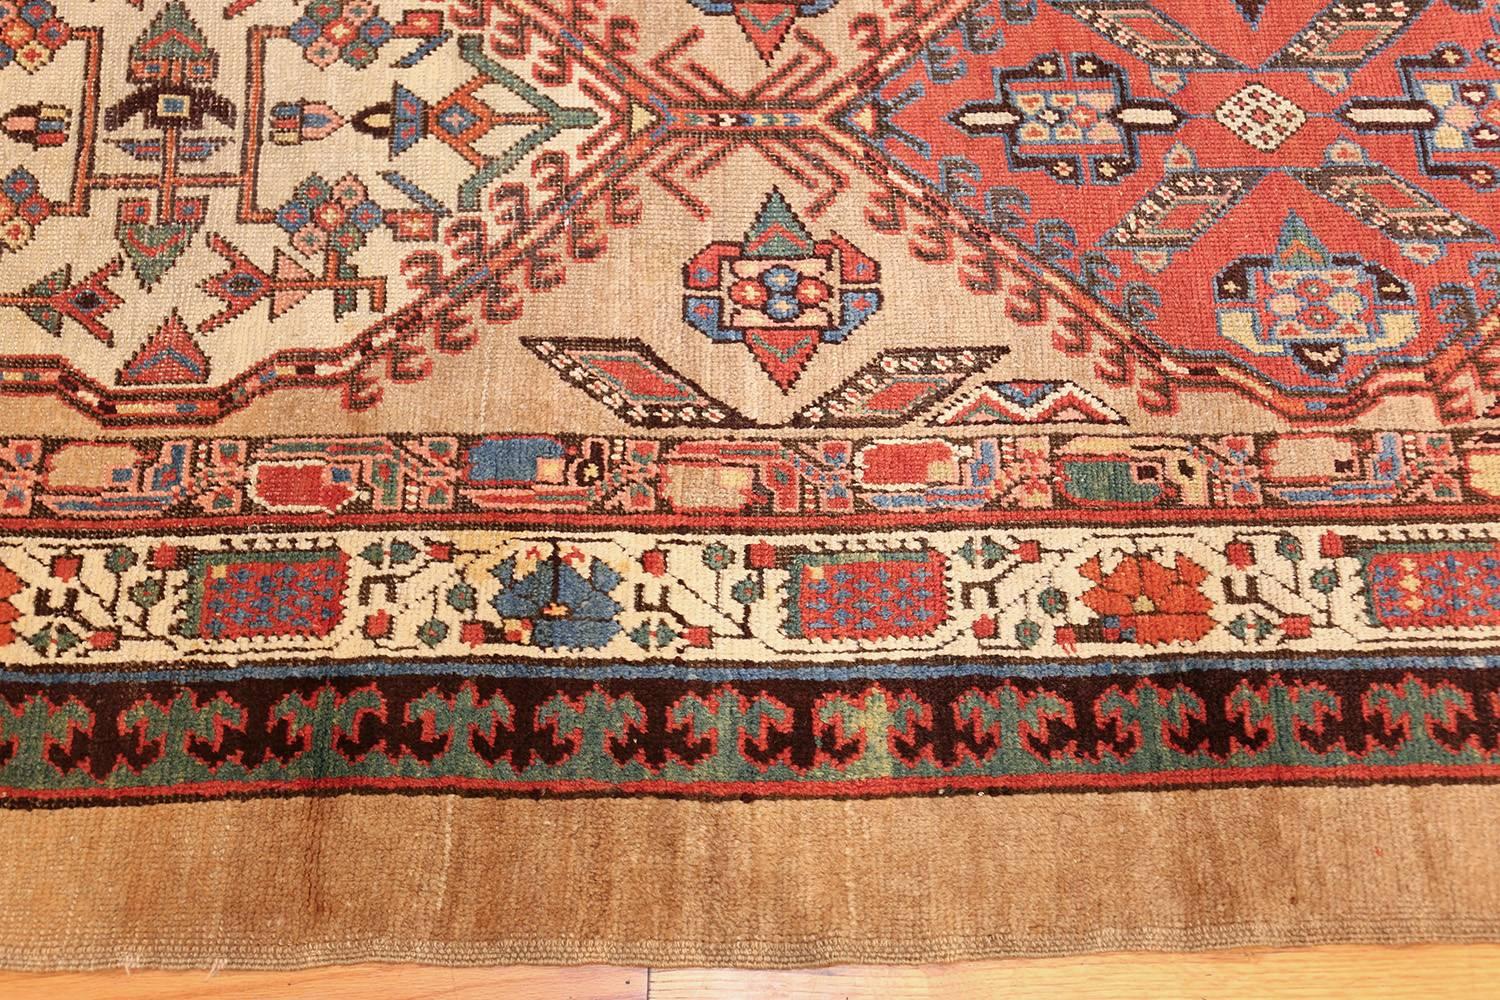 Hand-Knotted Antique Persian Serab Runner Rug. Size: 4 ft x 12 ft 10 in (1.22 m x 3.91 m)